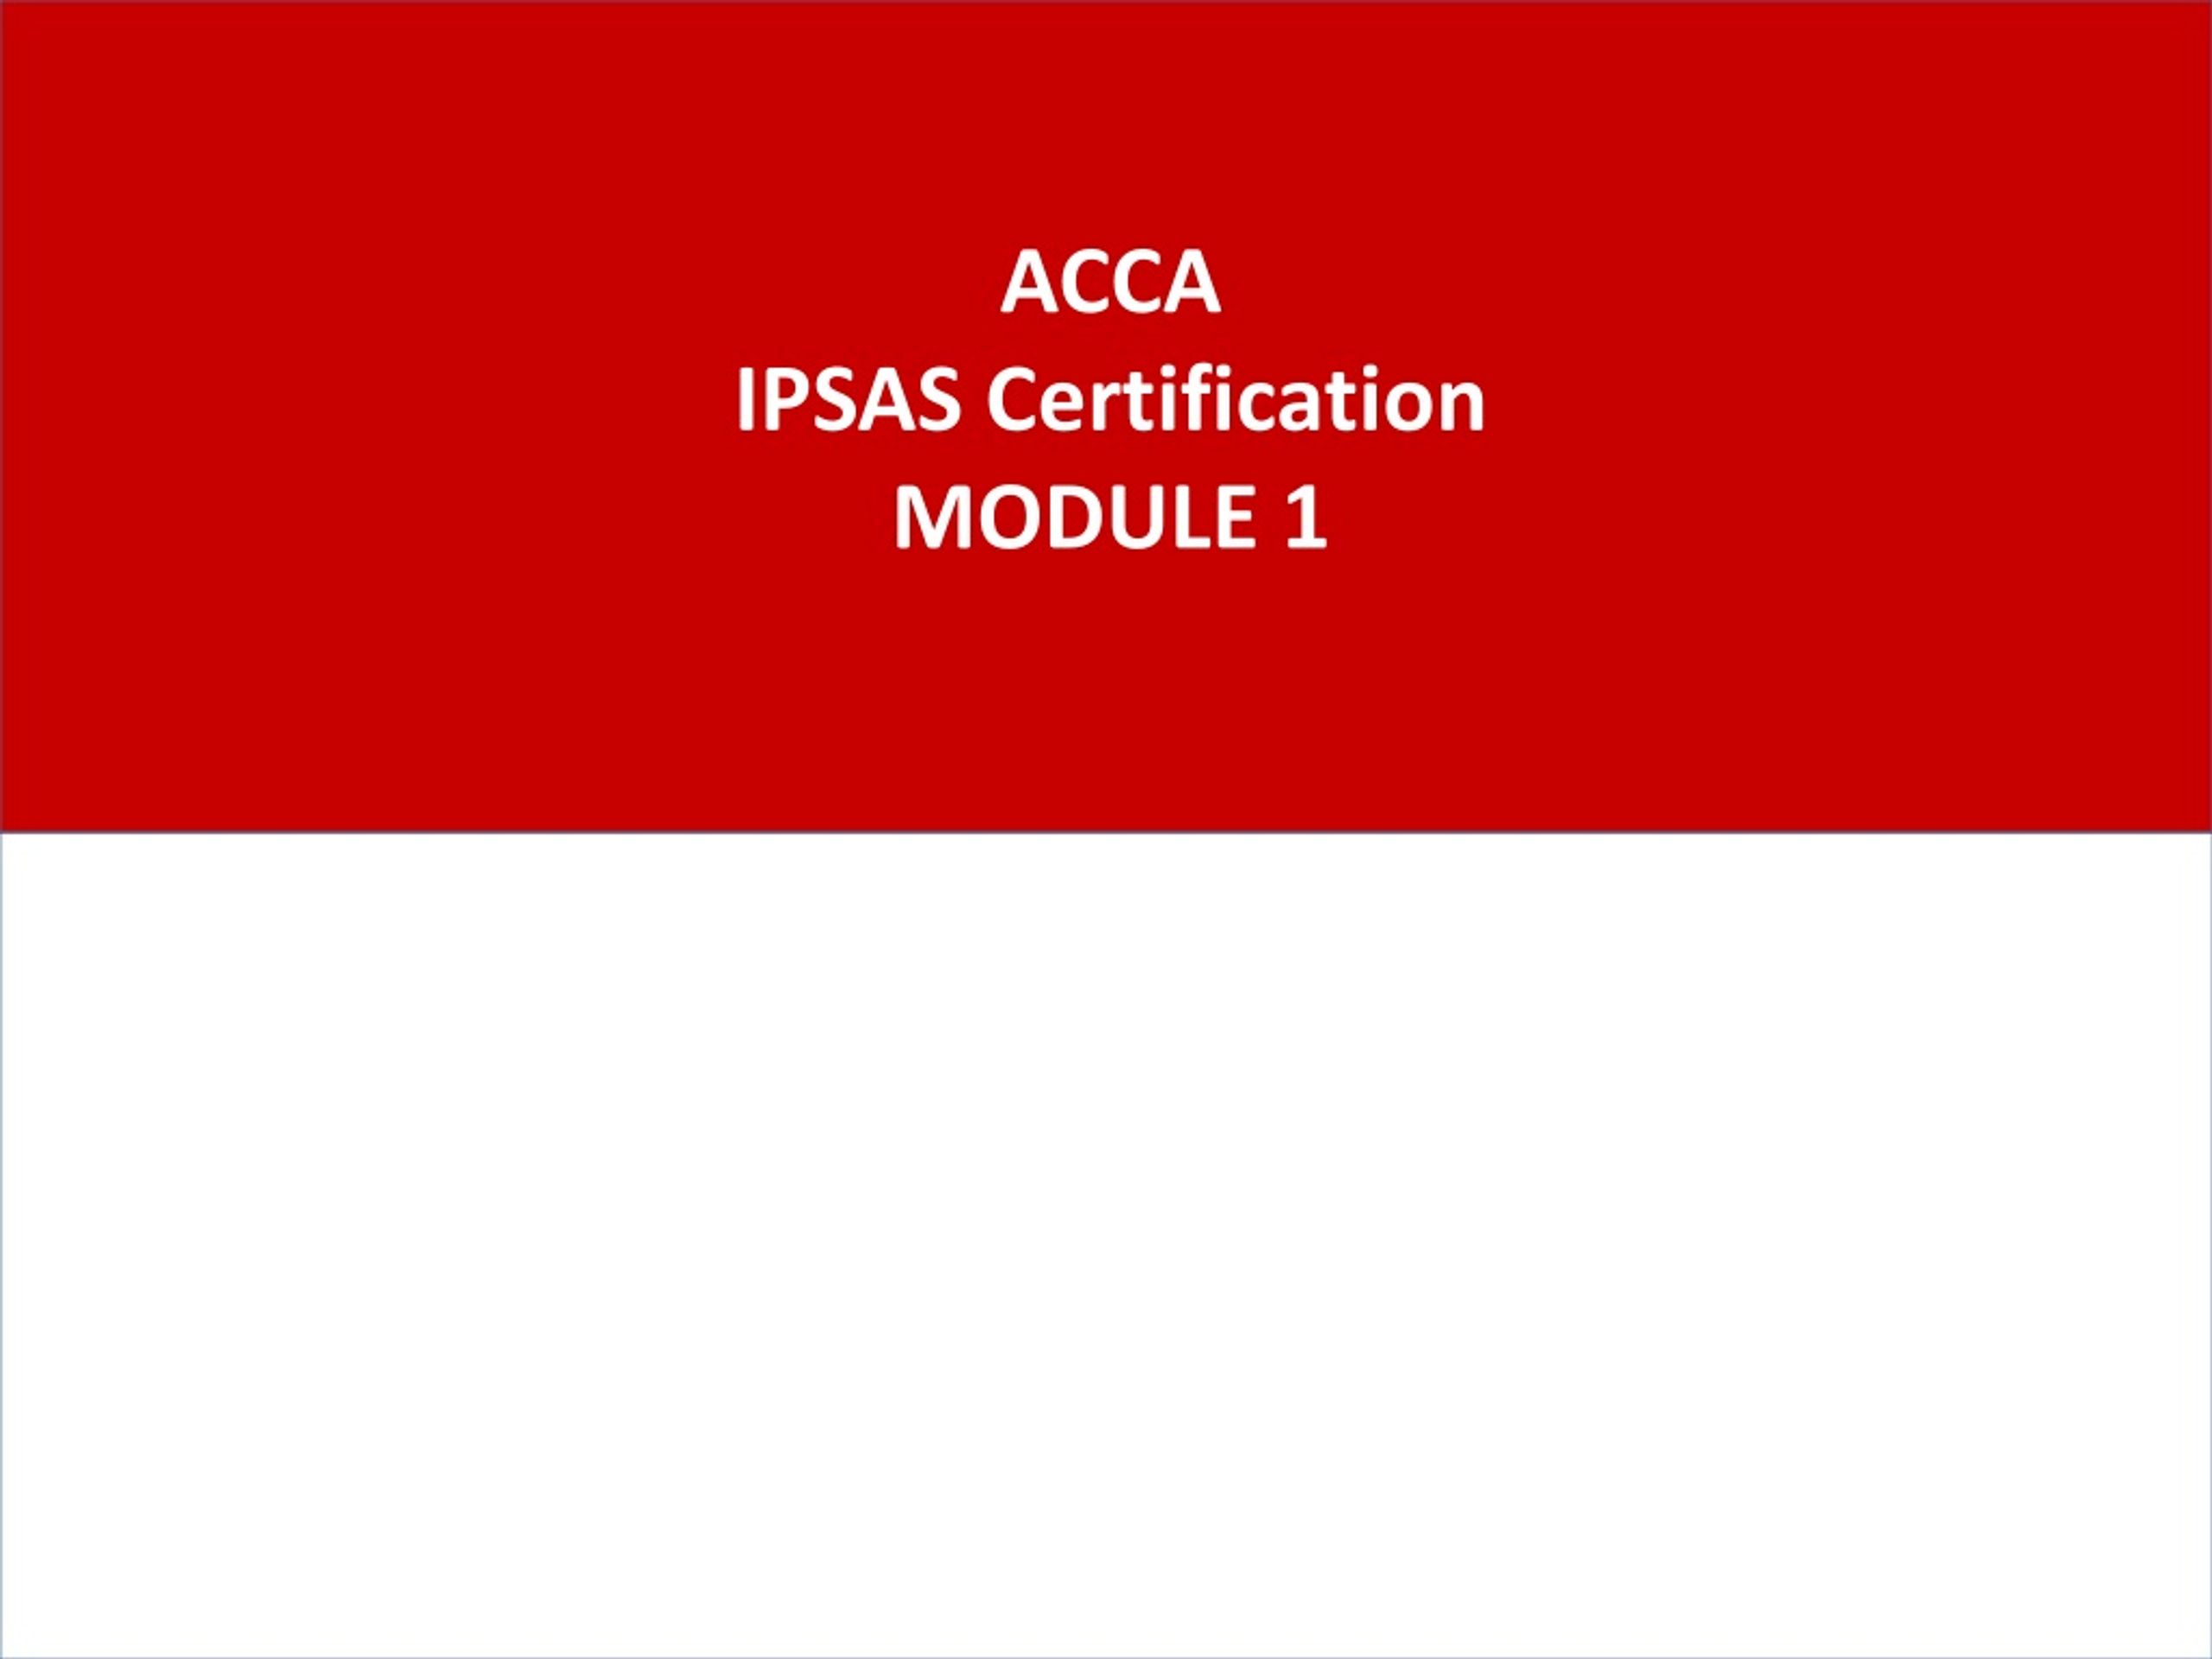 ppt acca ipsas certification module 1 powerpoint presentation free download id 8841704 special purpose financial statements disclosure requirements p&l spreadsheet